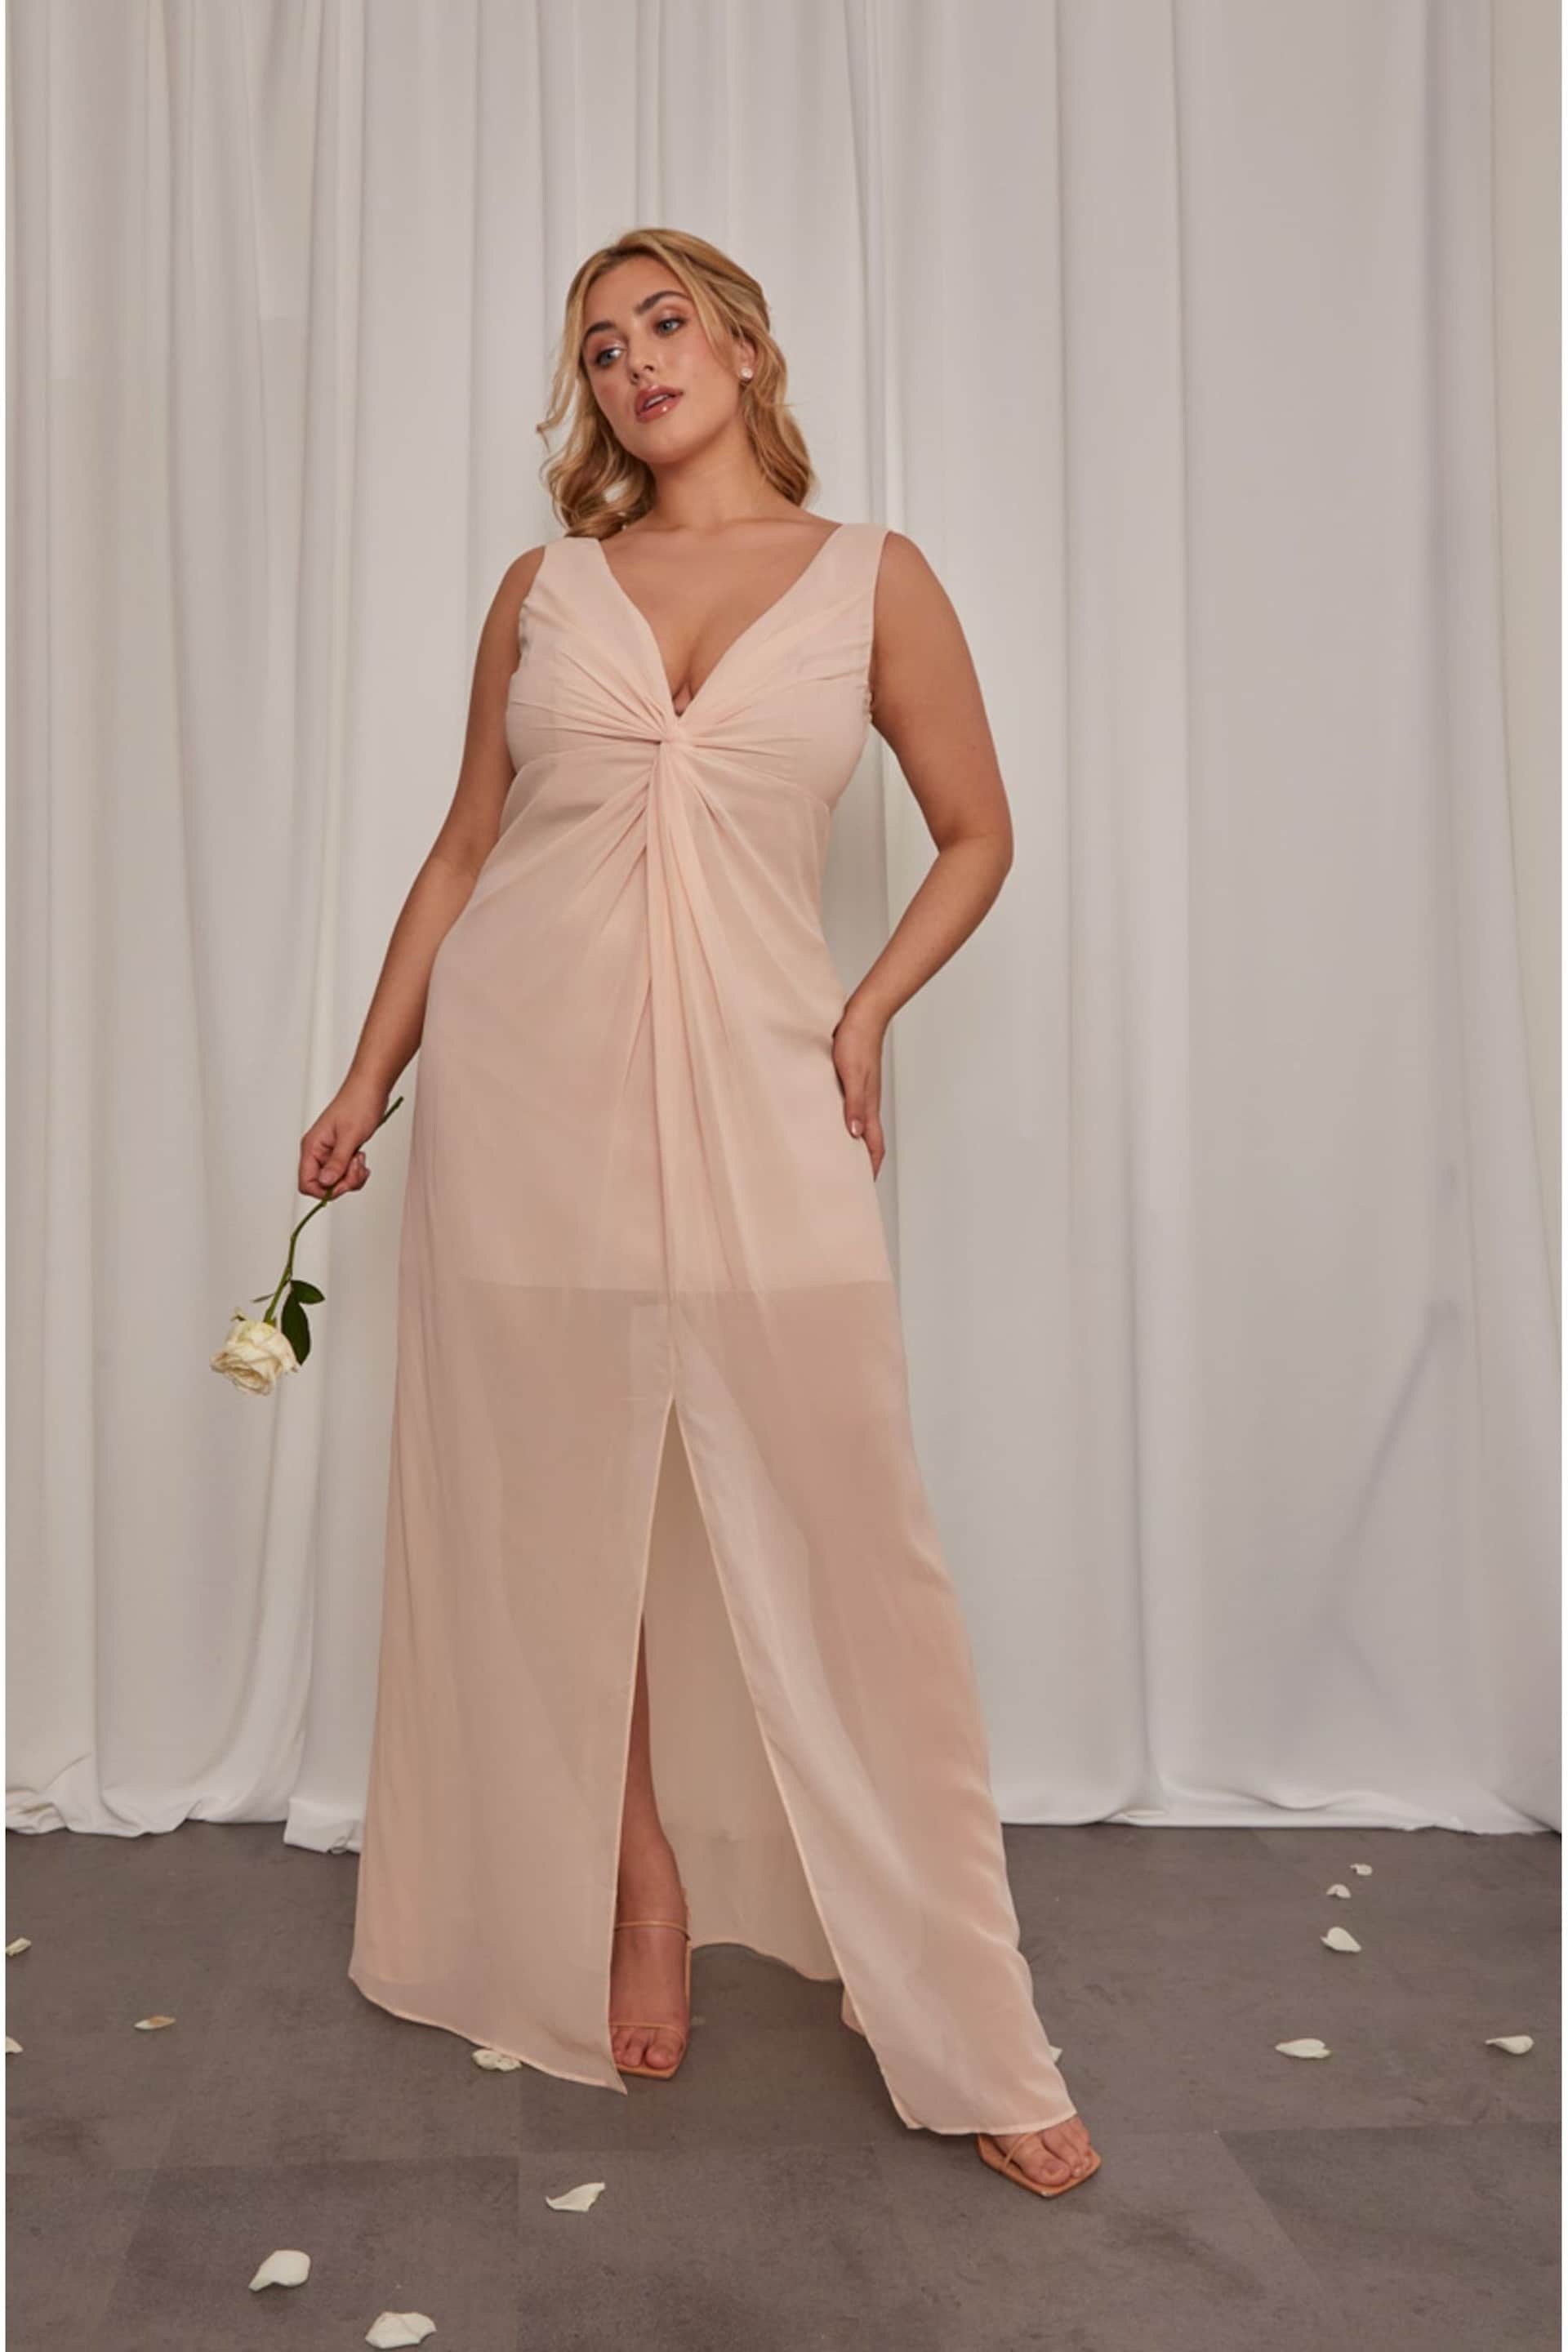 Chi Chi London Gold Curve Knot Detail Maxi Dress - Image 1 of 4